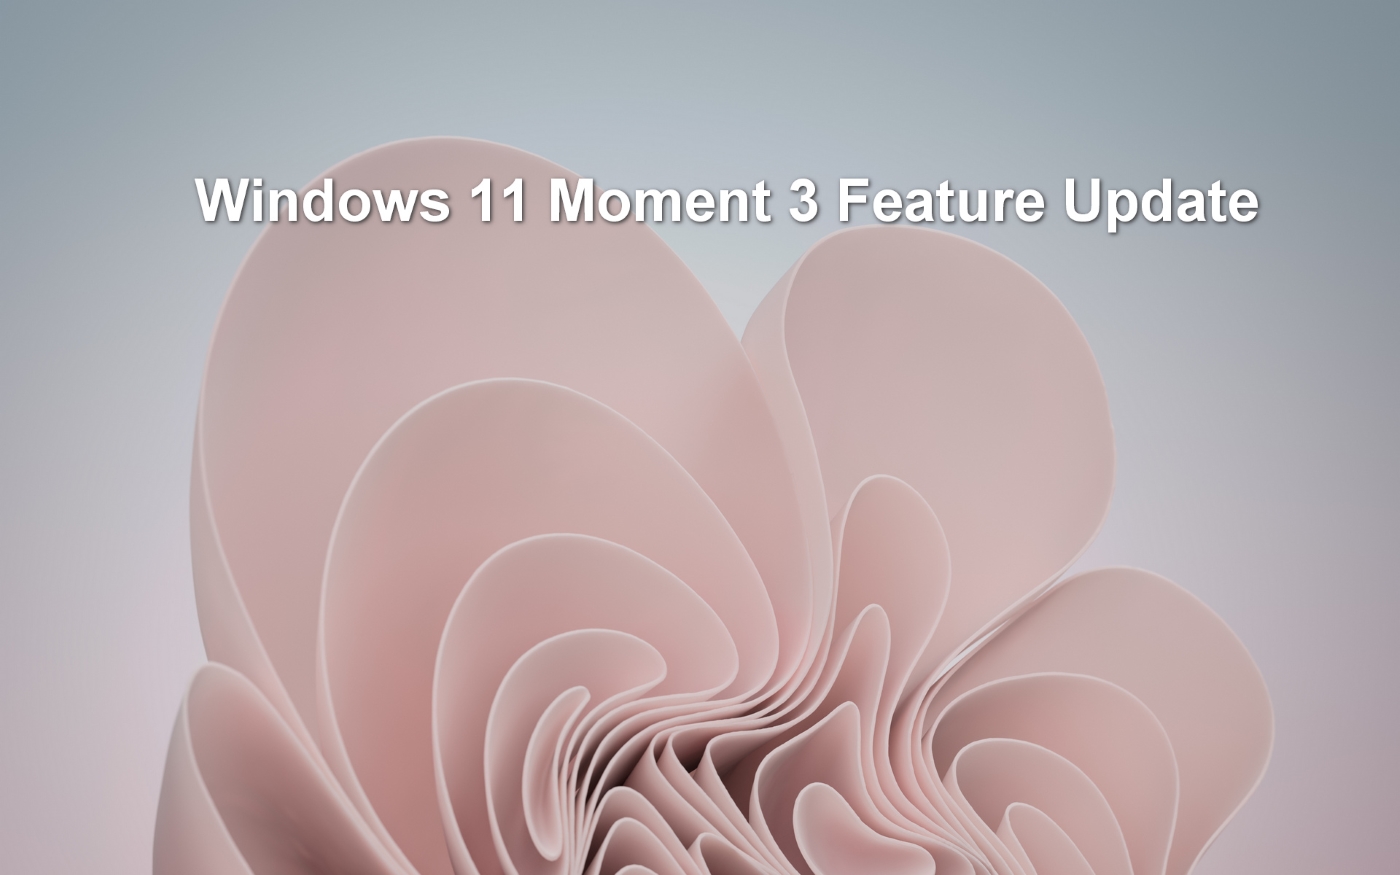 Windows 11 Moment 3 update: What features to expect